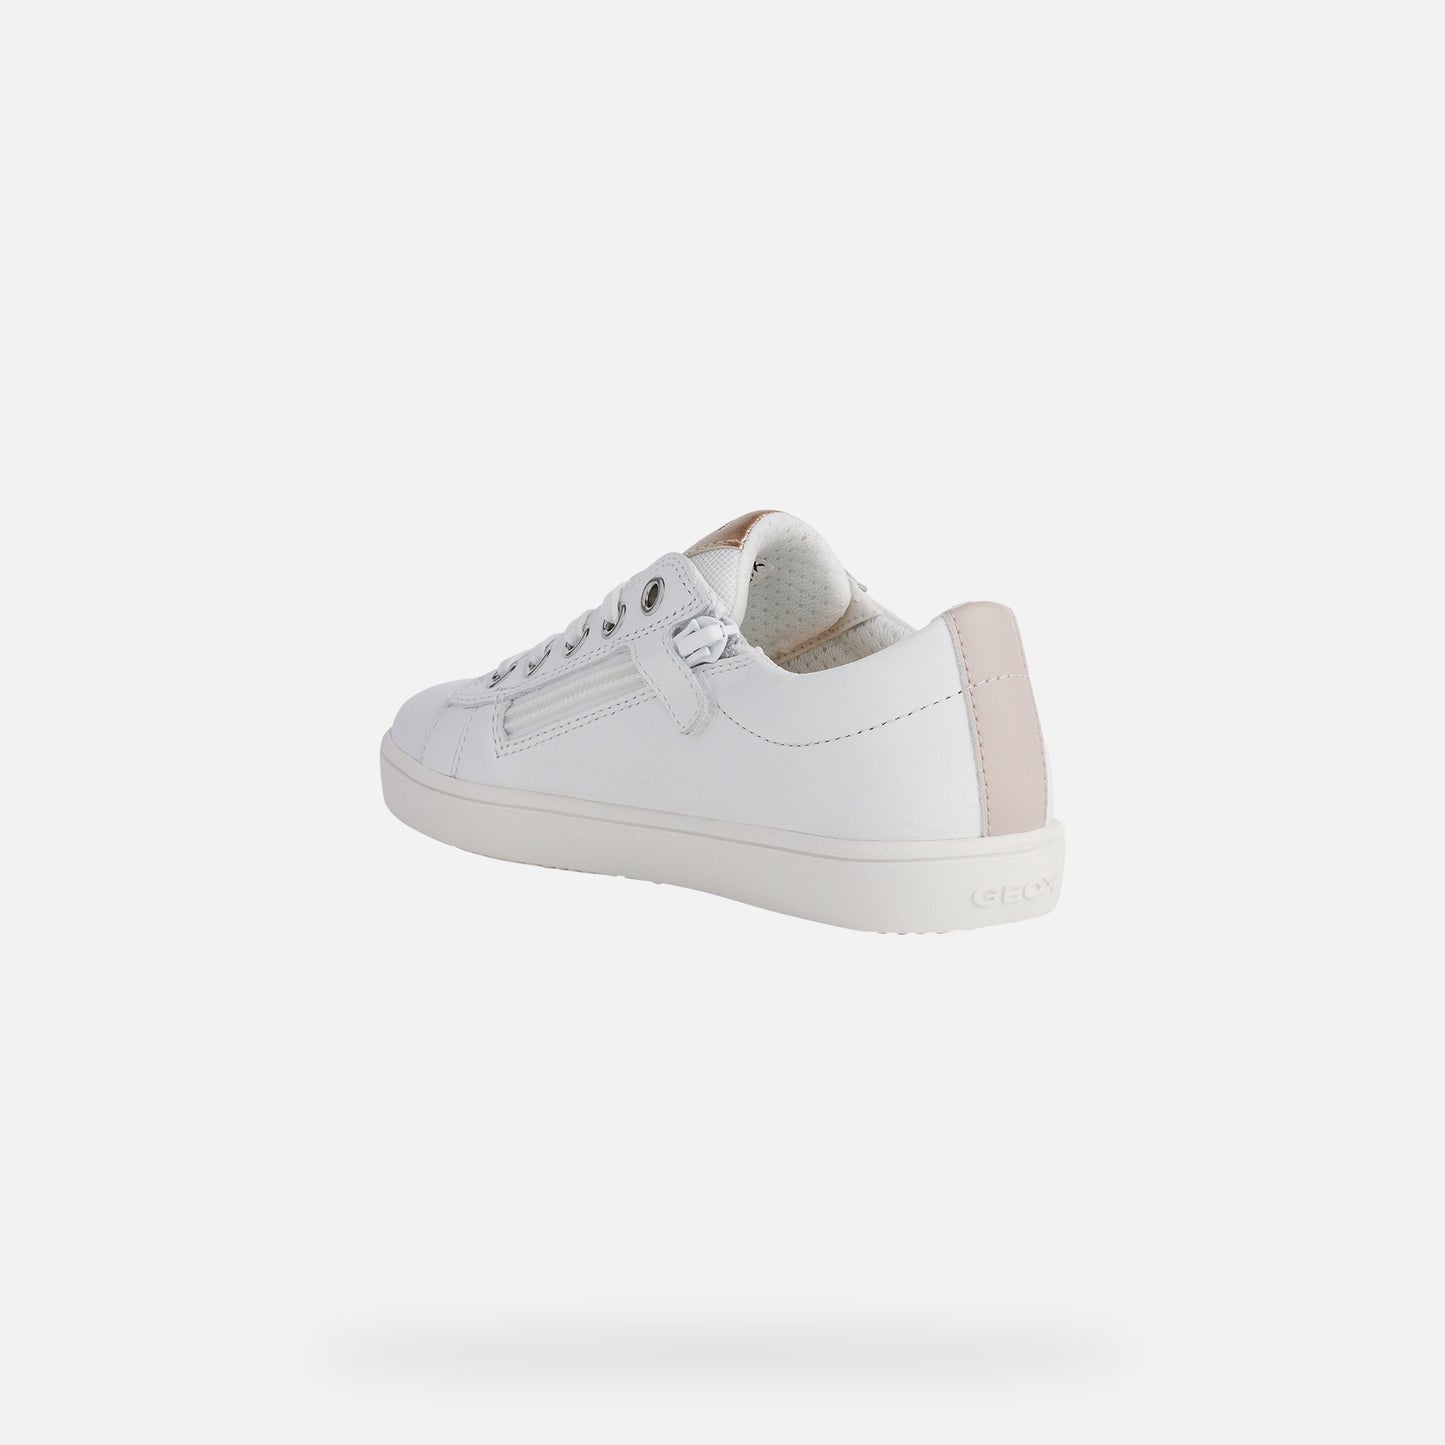 A girls casual trainer by Geox, style Kathe, in white and pink with lace fastening. Inner side view.